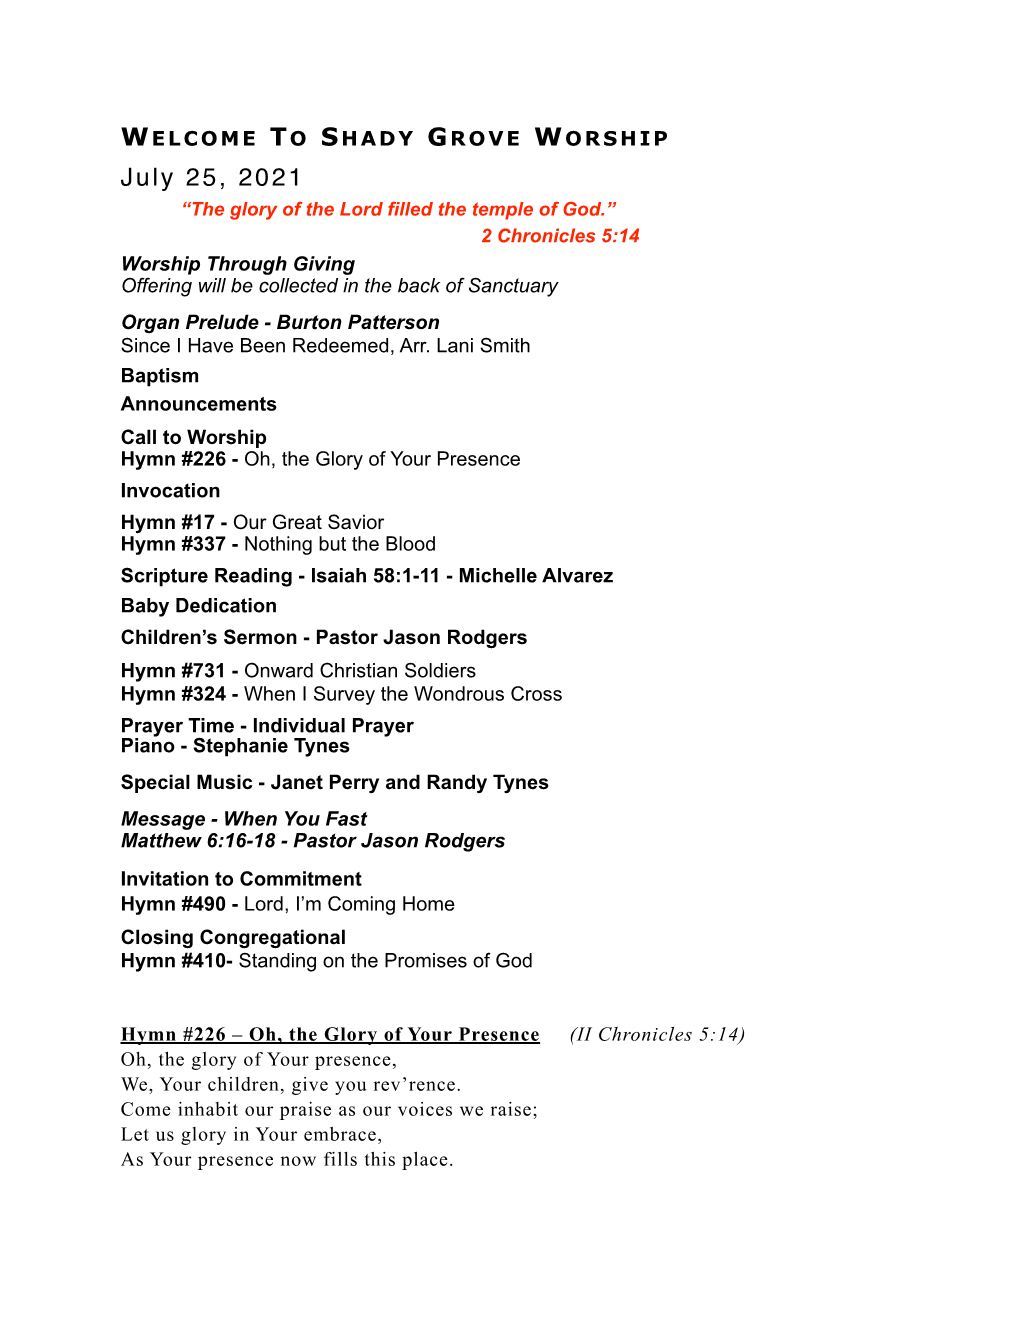 Order of Service July 25, 2021